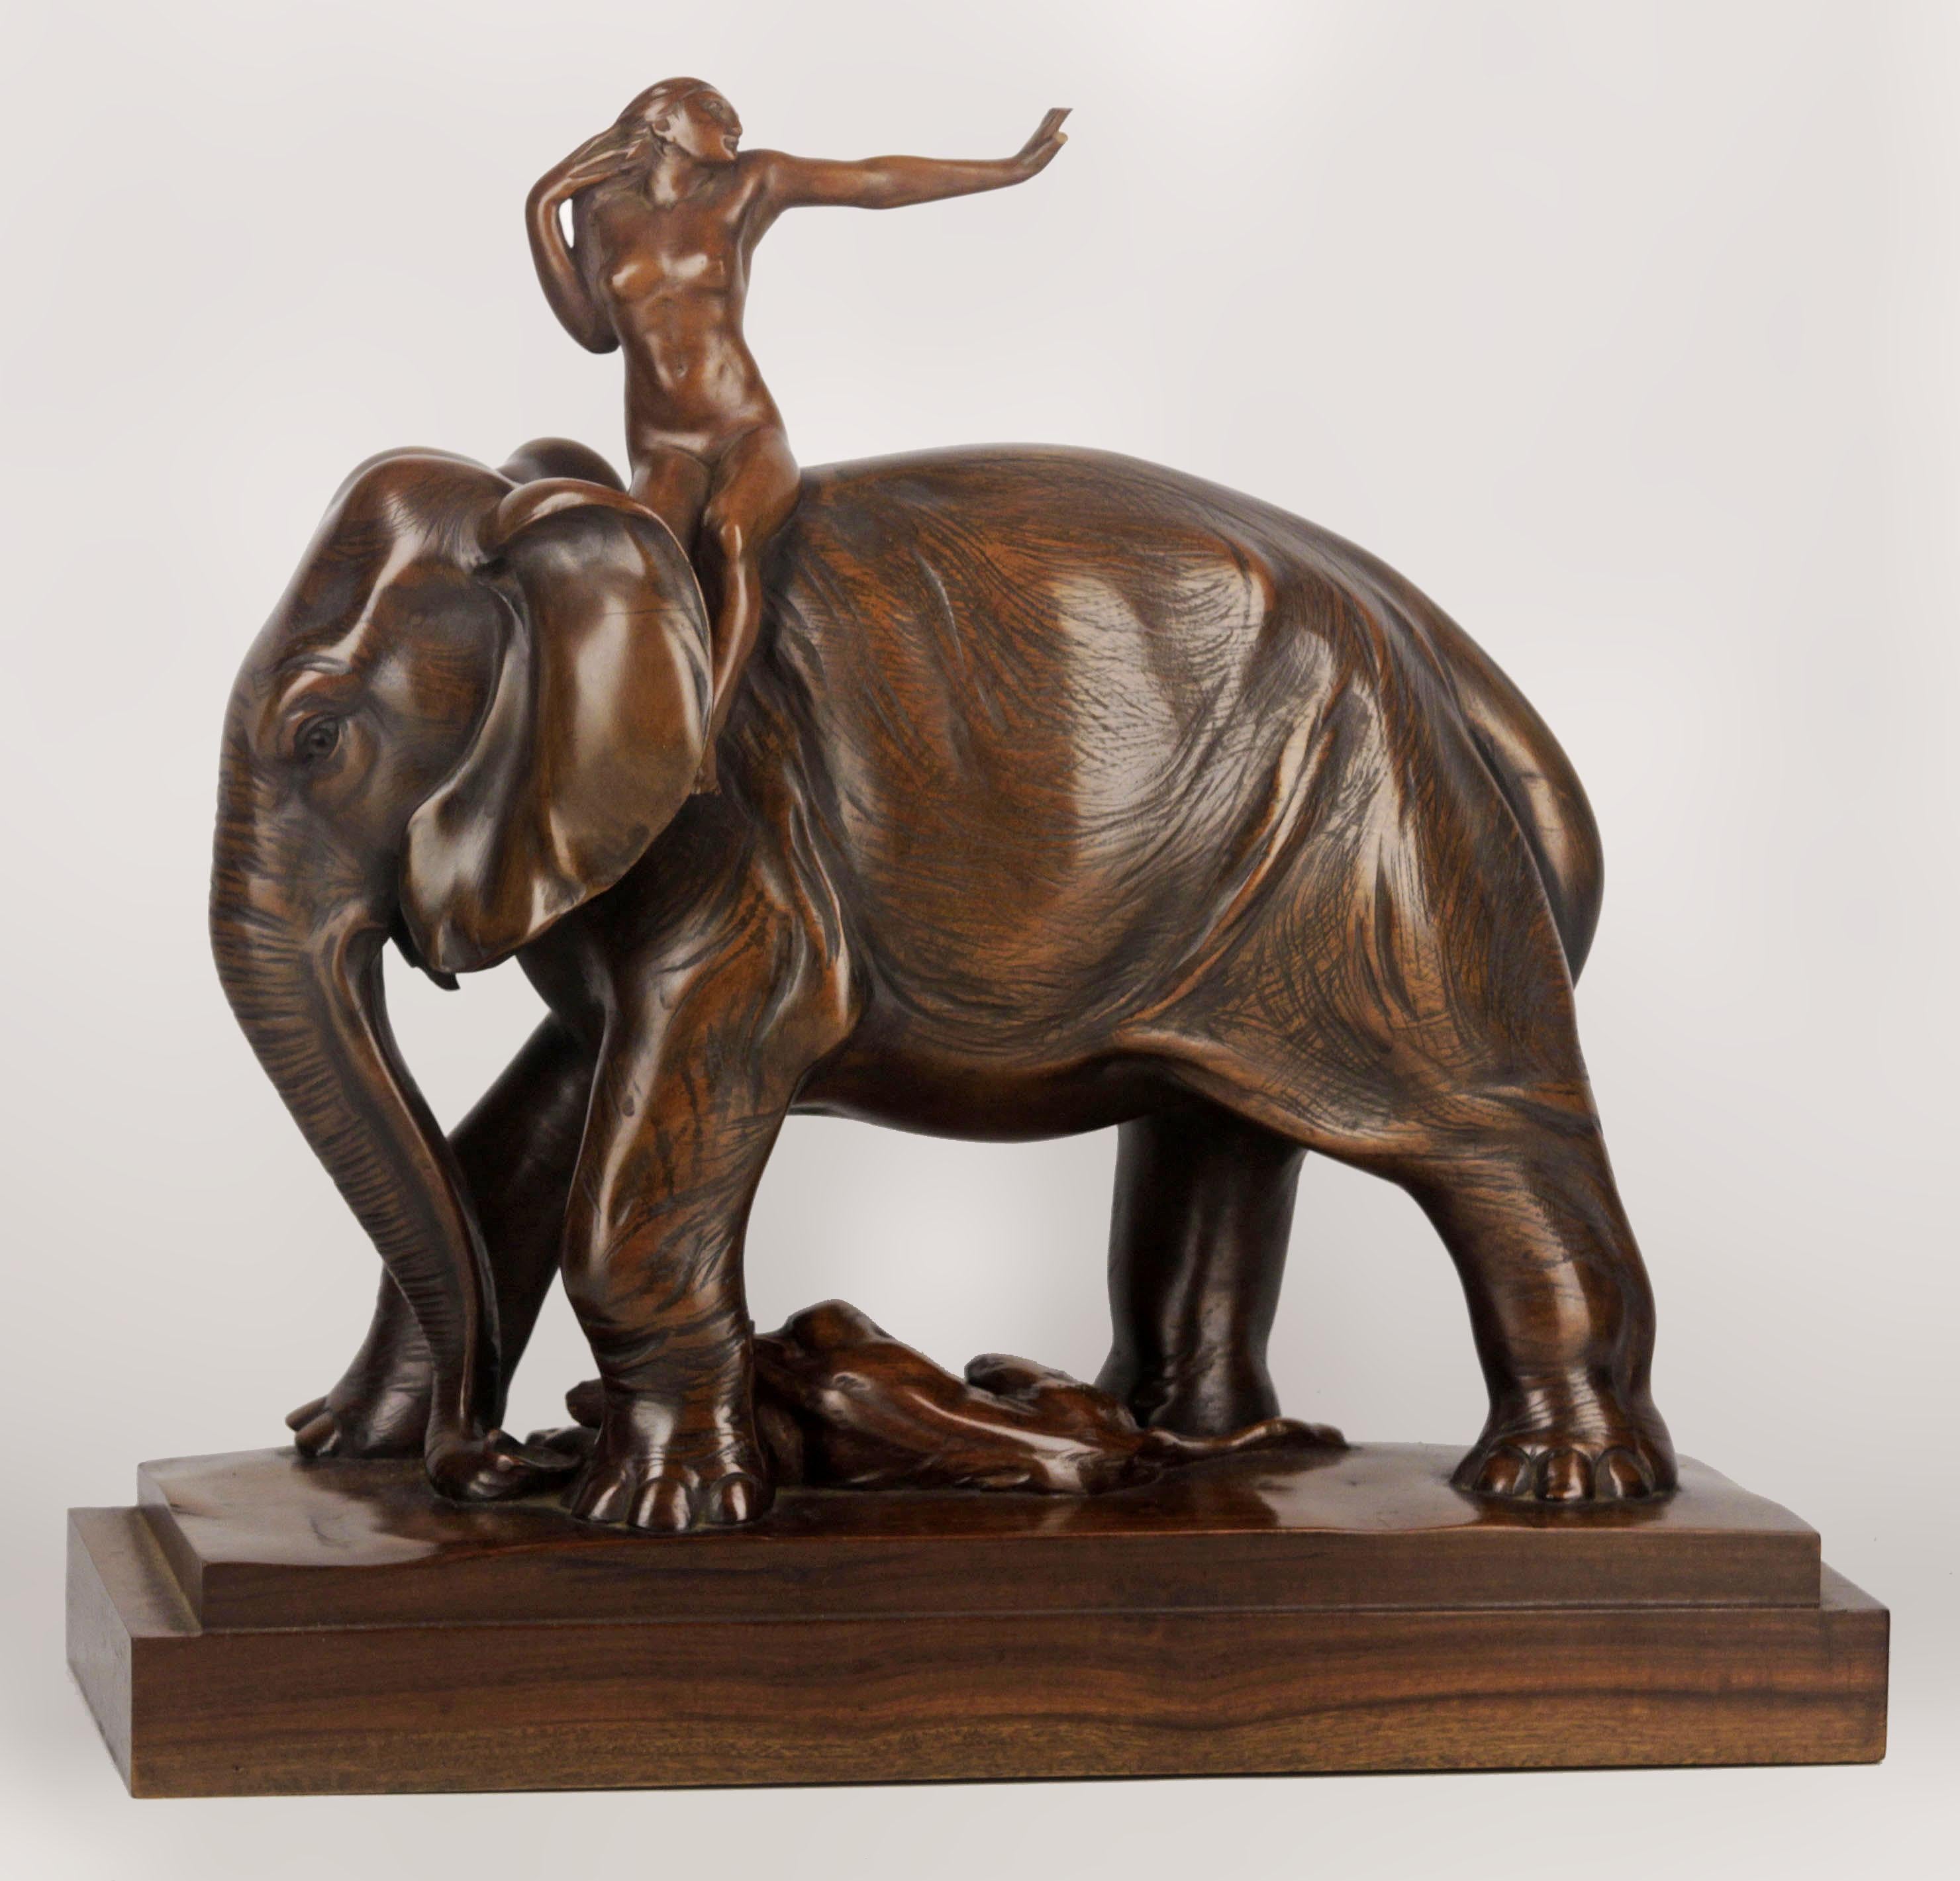 Early 20th century african elephant, tiger and woman rider varnished wood sculpture signed by J. Zanetti

By: J. Zanetti
Material: wood
Technique: carved, hand-carved, hand-crafted, varnished, polished
Dimensions: 12.5 in x 5 in x 12.5 in
Date: